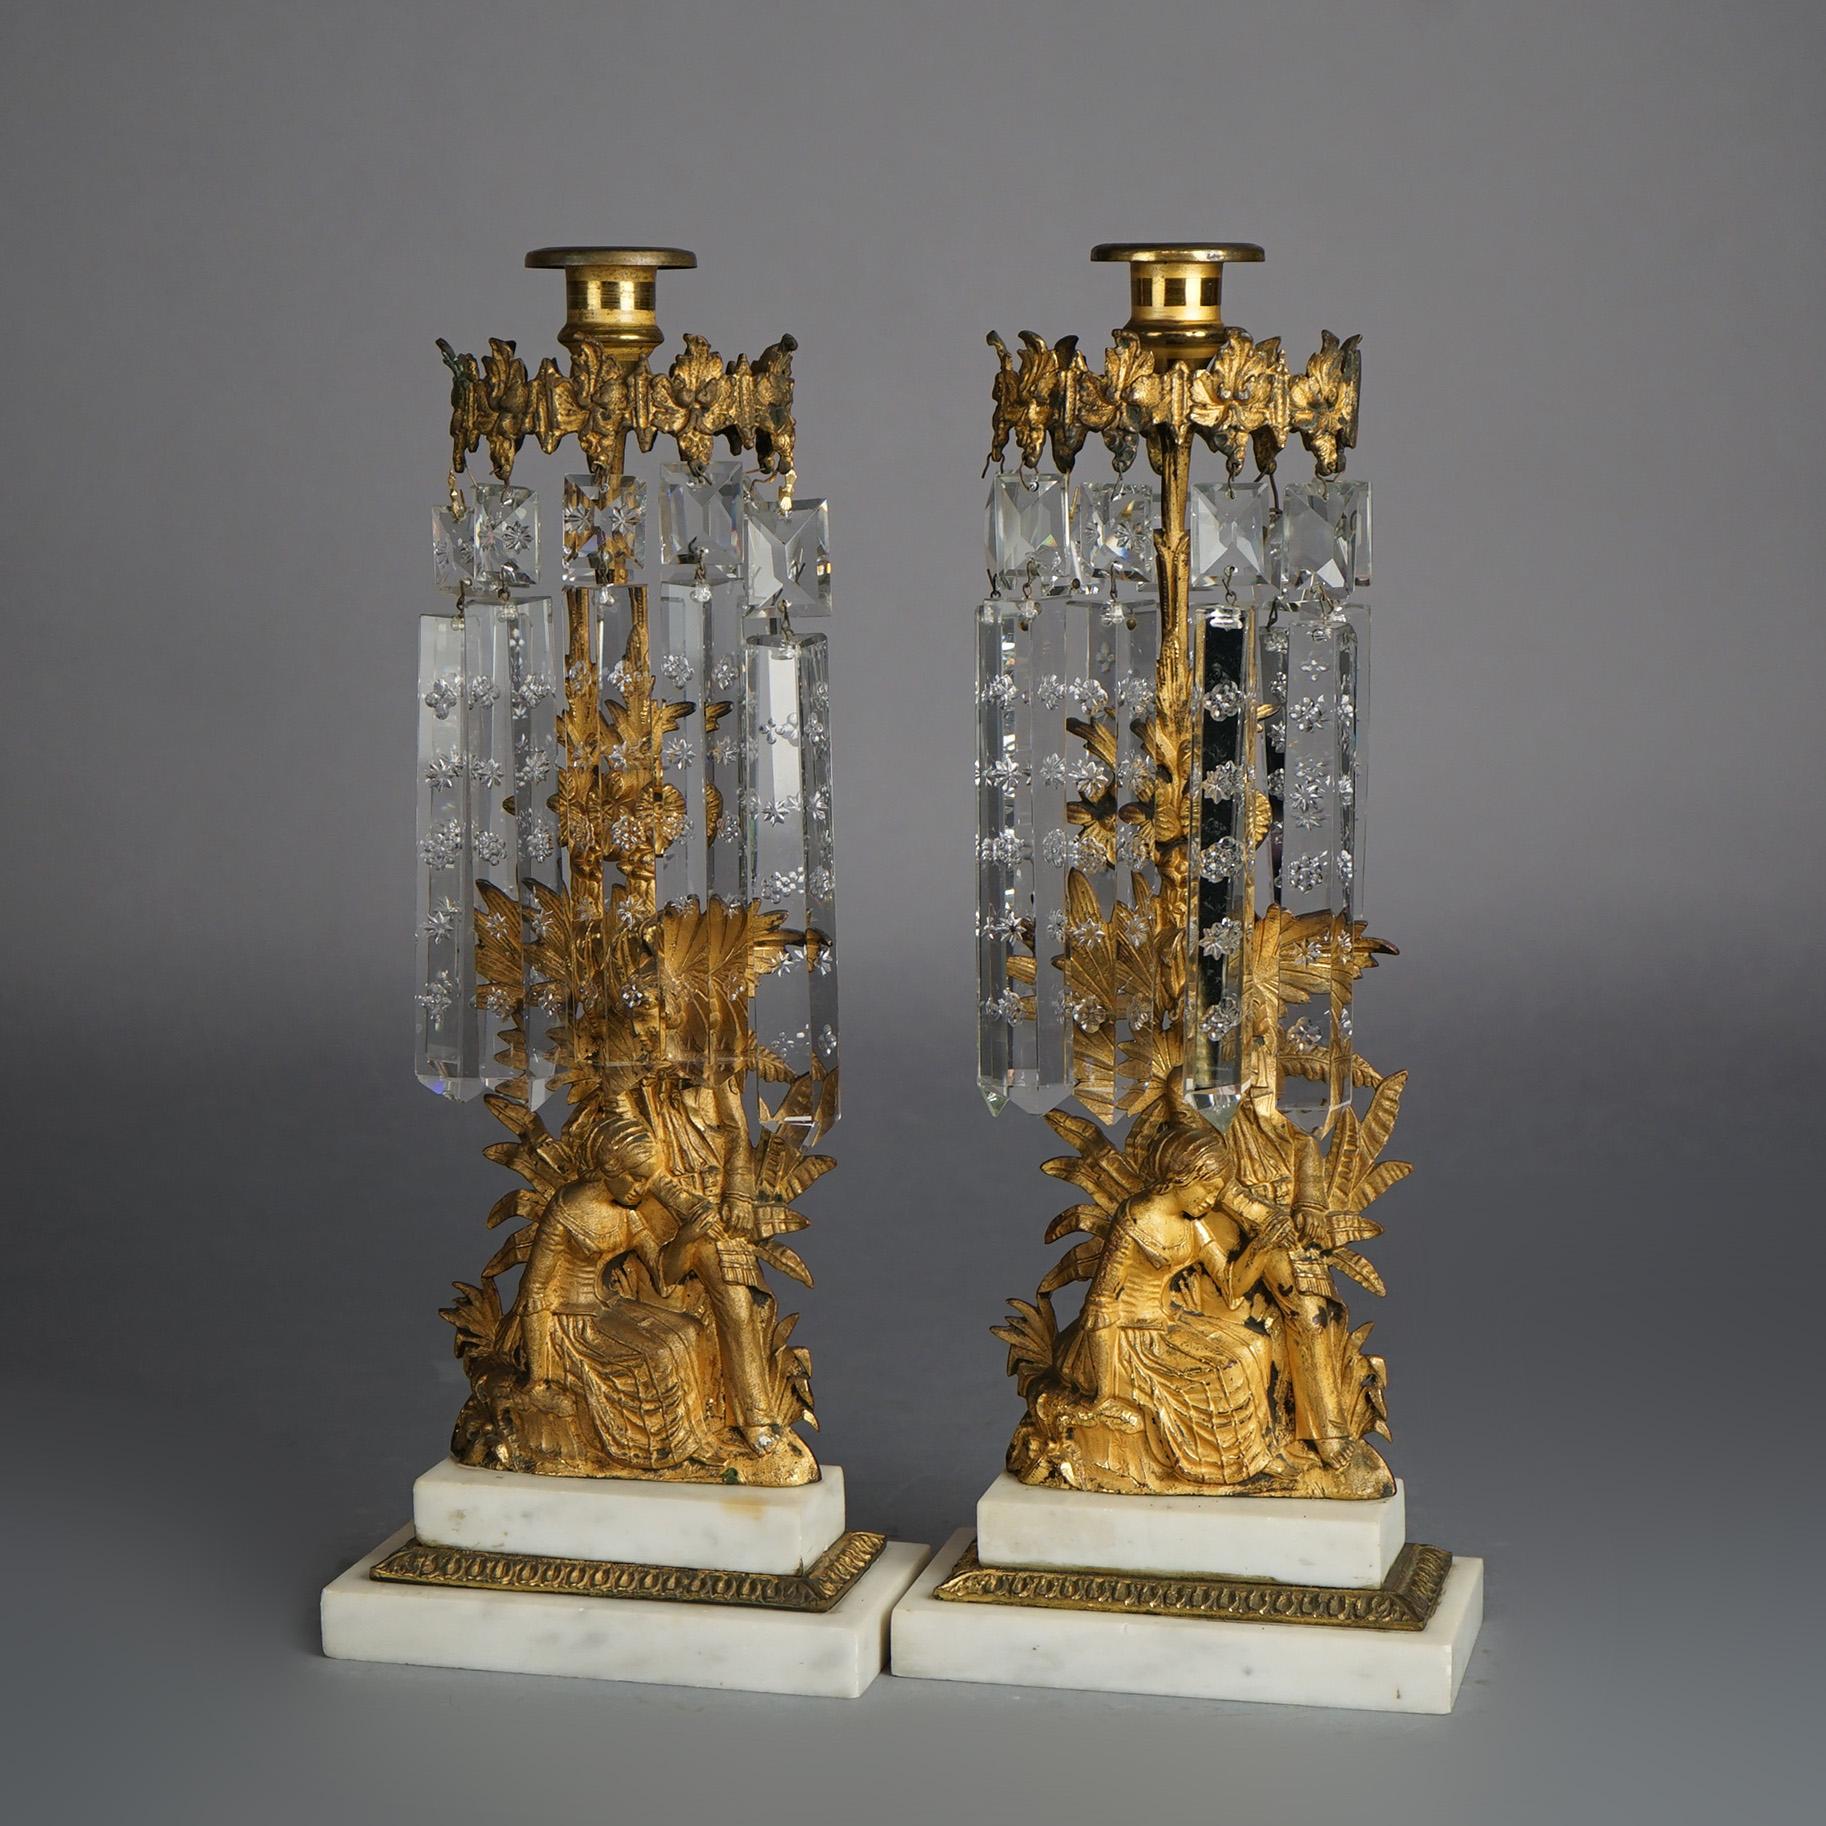 Antique Gilt Bronze American Girandole Candelabras with Marble & Crystals C1880 For Sale 1